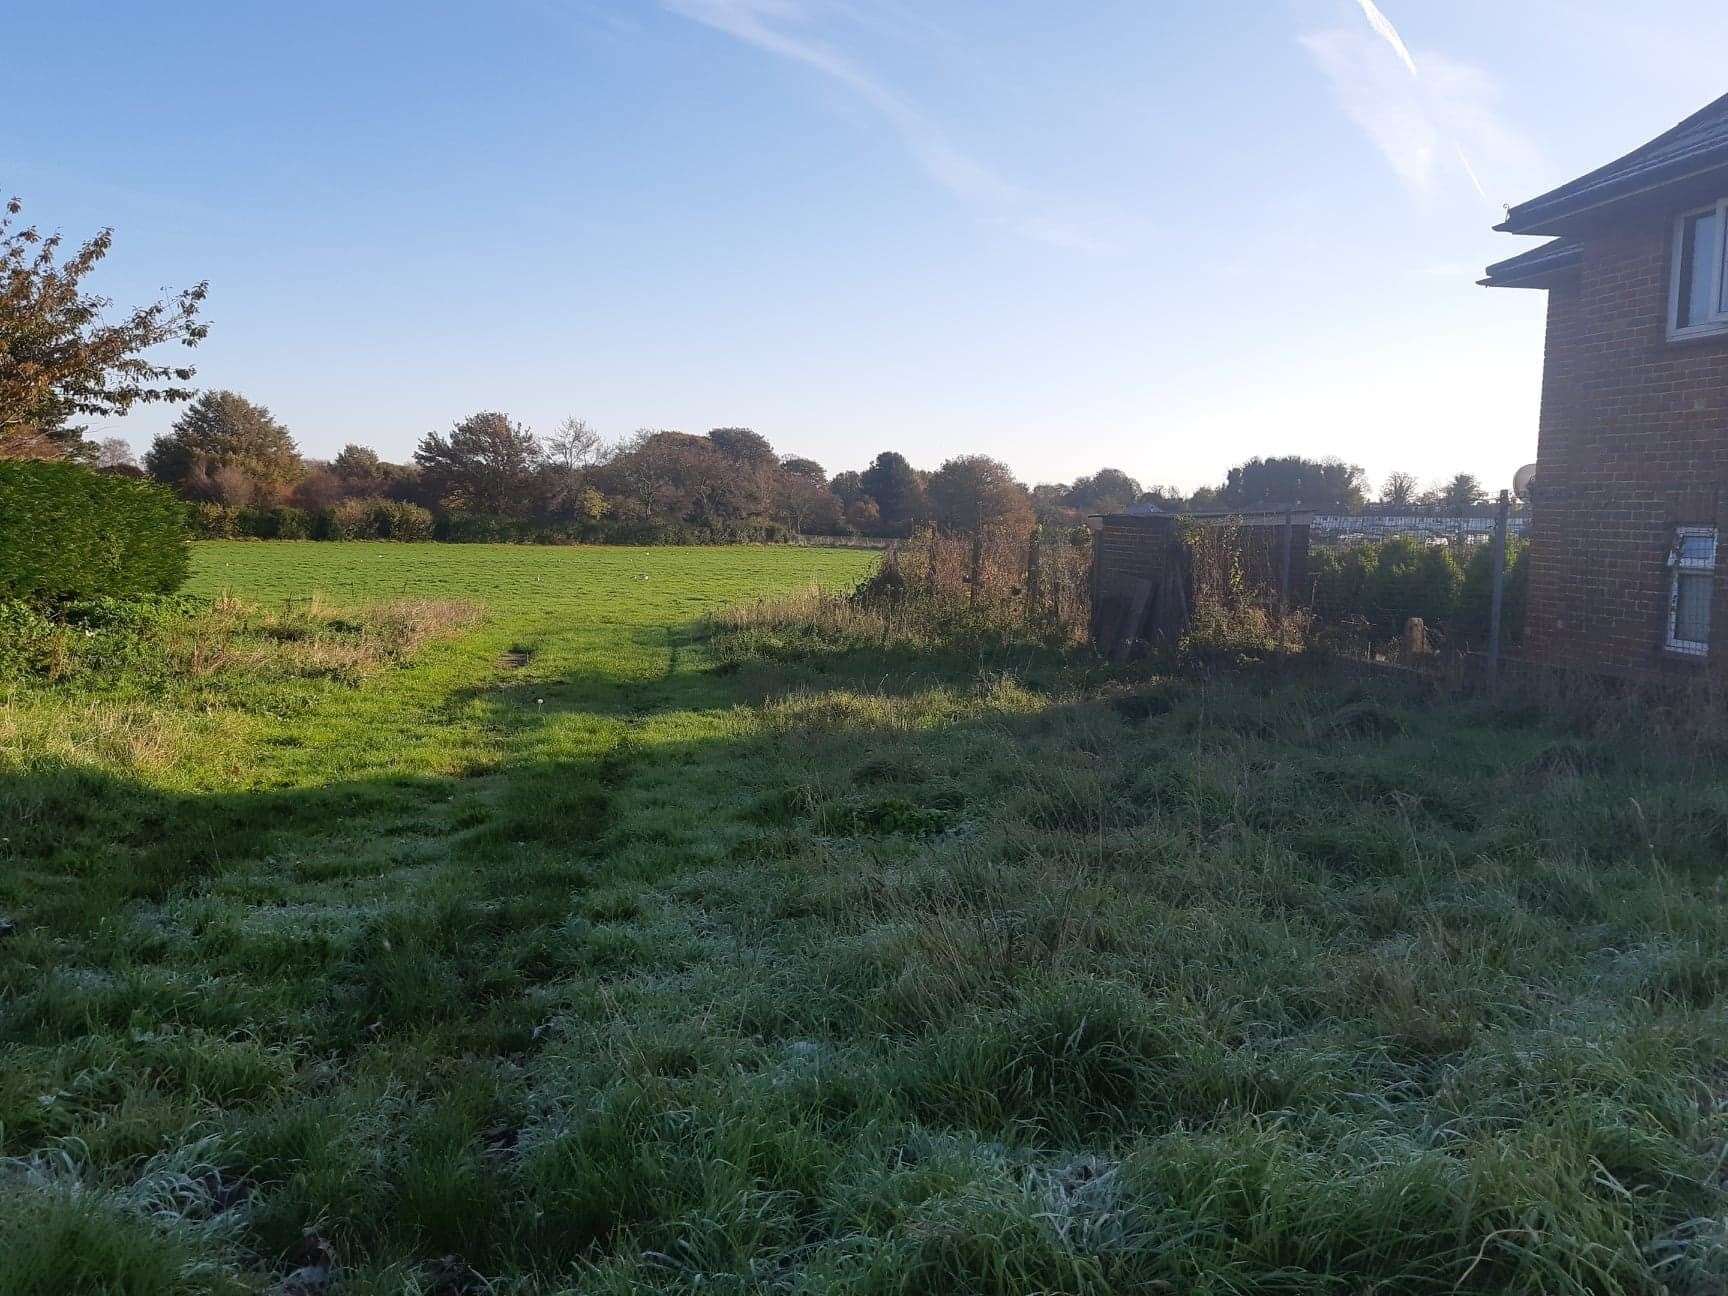 The 88 homes, football pitch and sports pavilion could be built at the former South Deal Primary School sports field if the scheme is approved